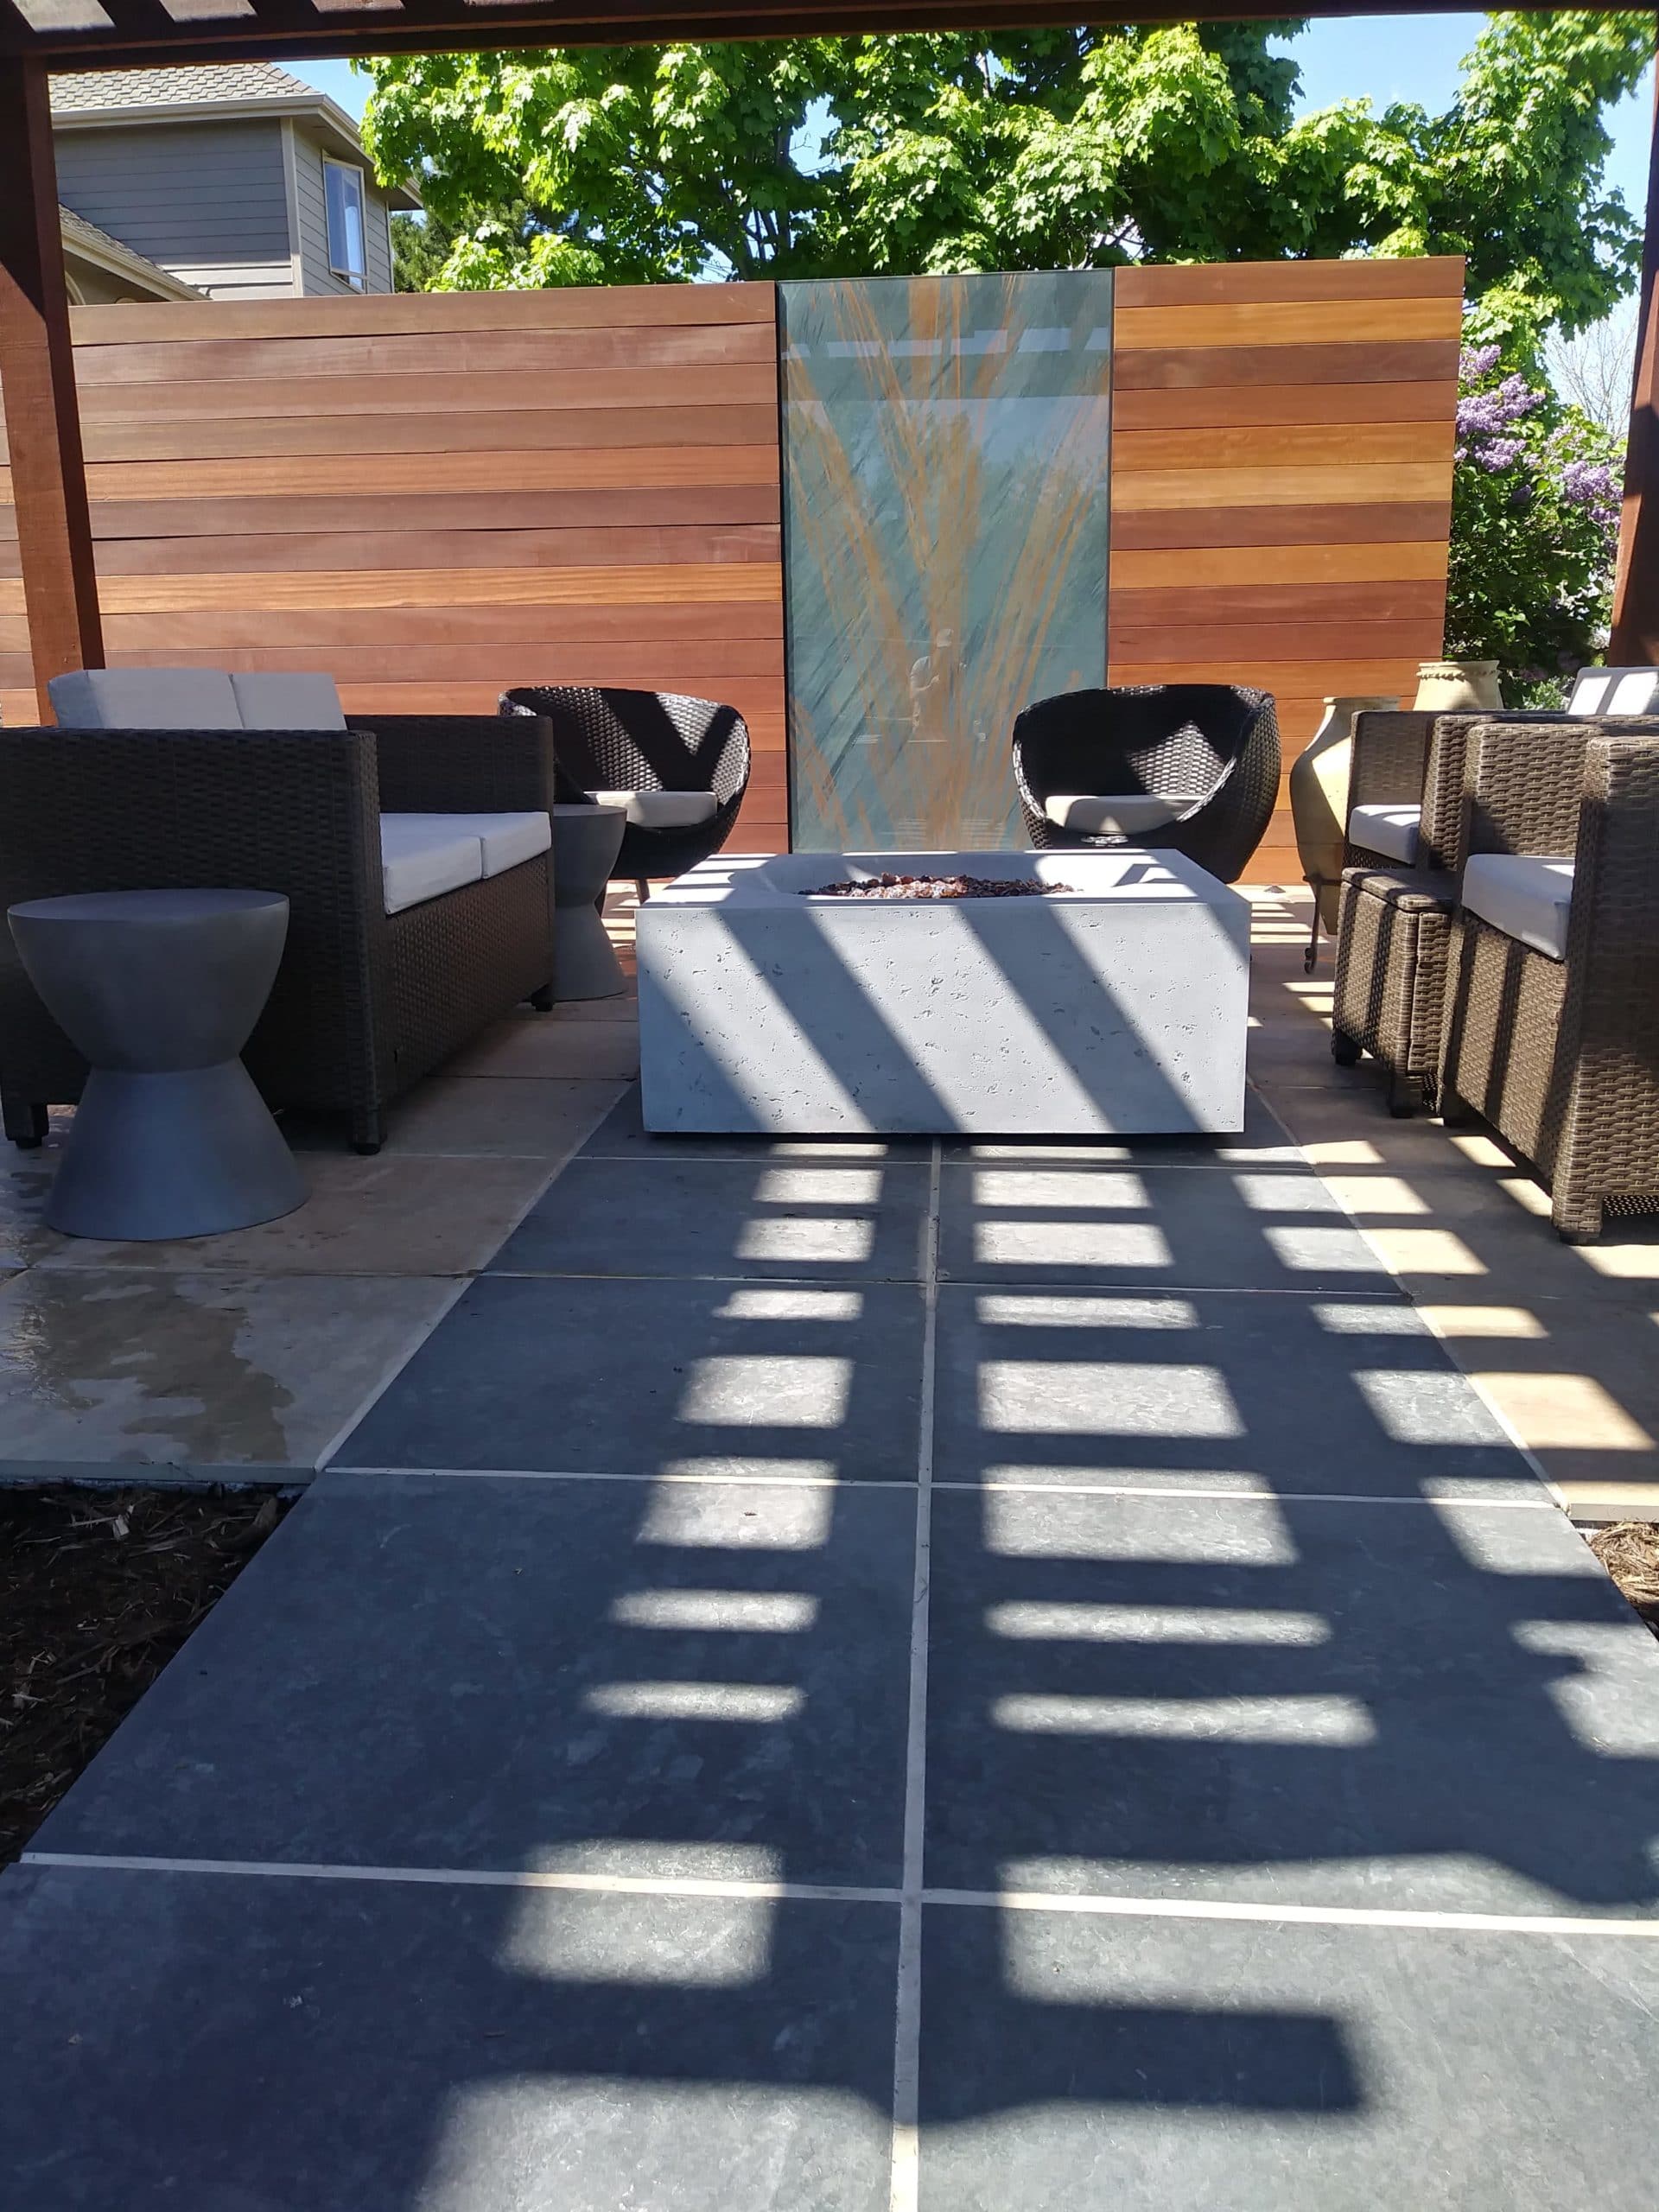 Concrete bowl fire pit with pergola and flat stone patio.